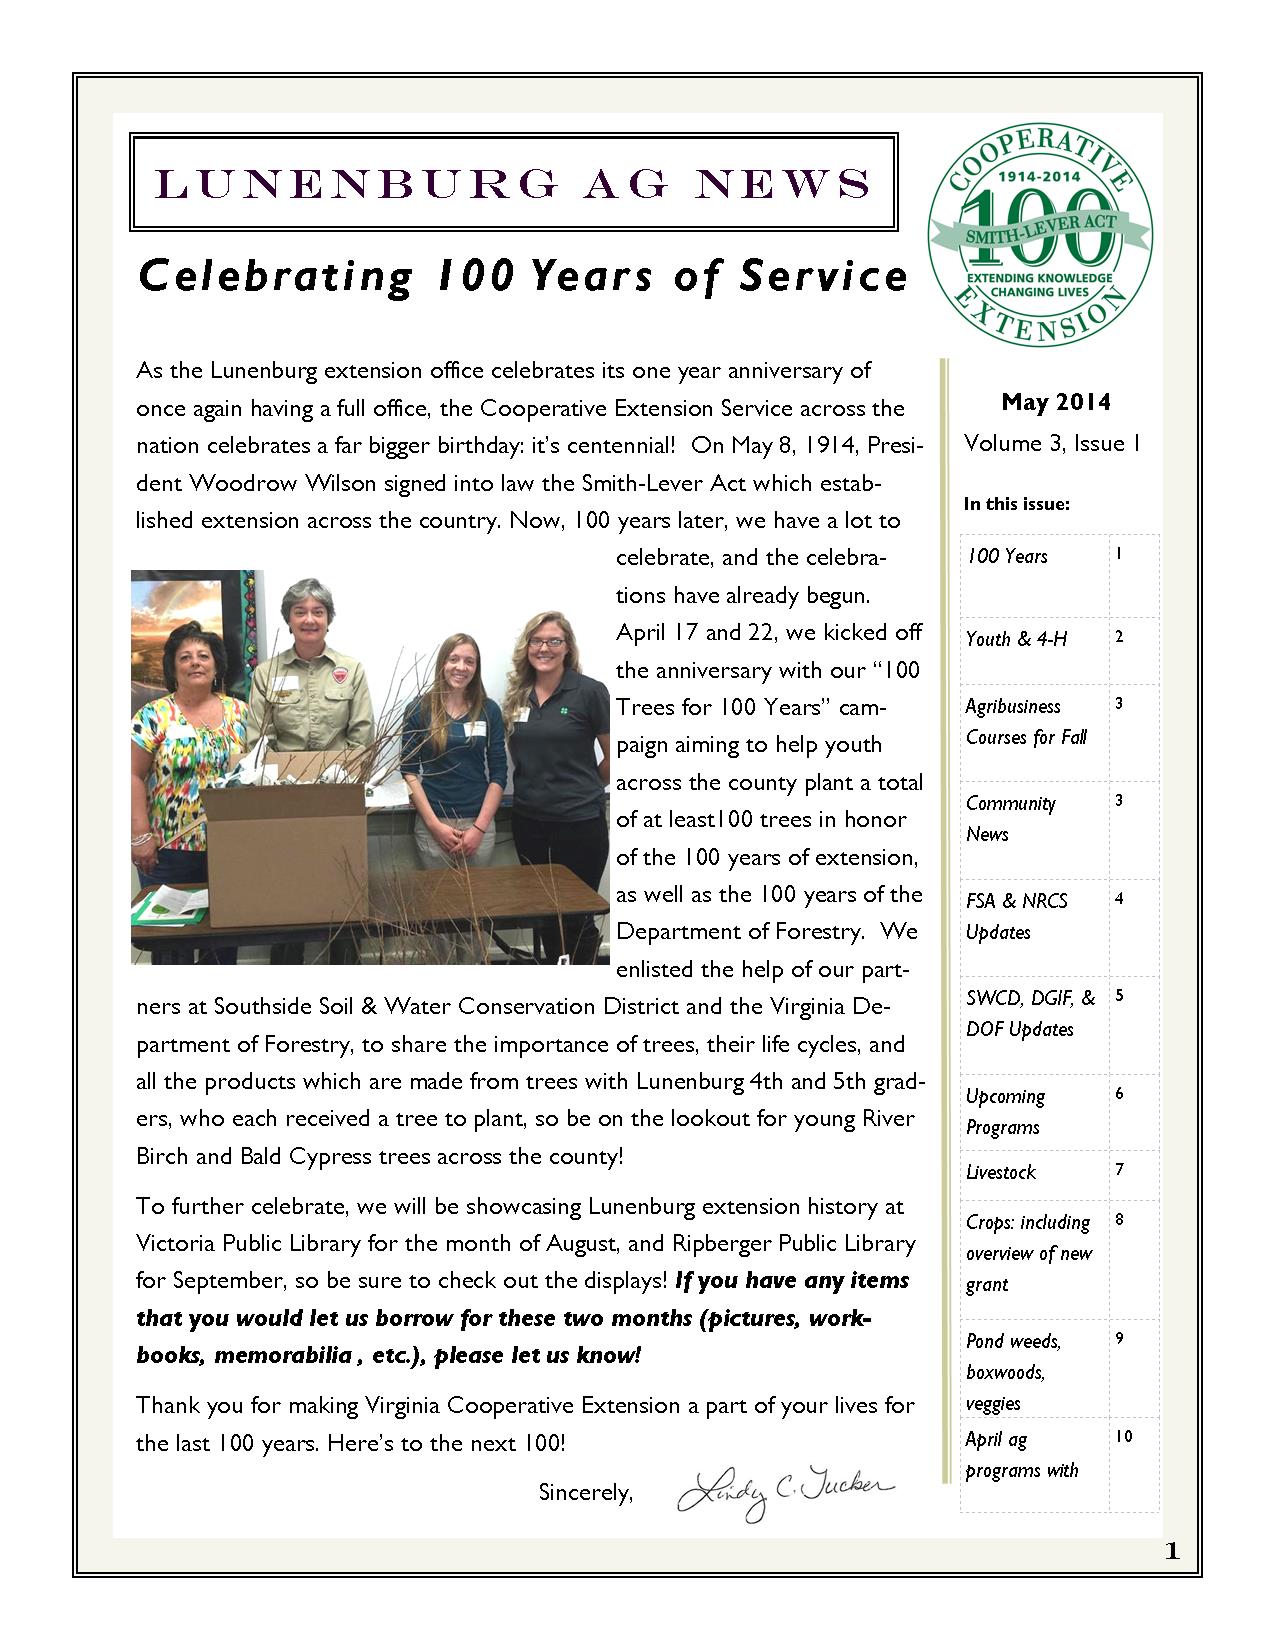 May 2014 Newsletter Page 1